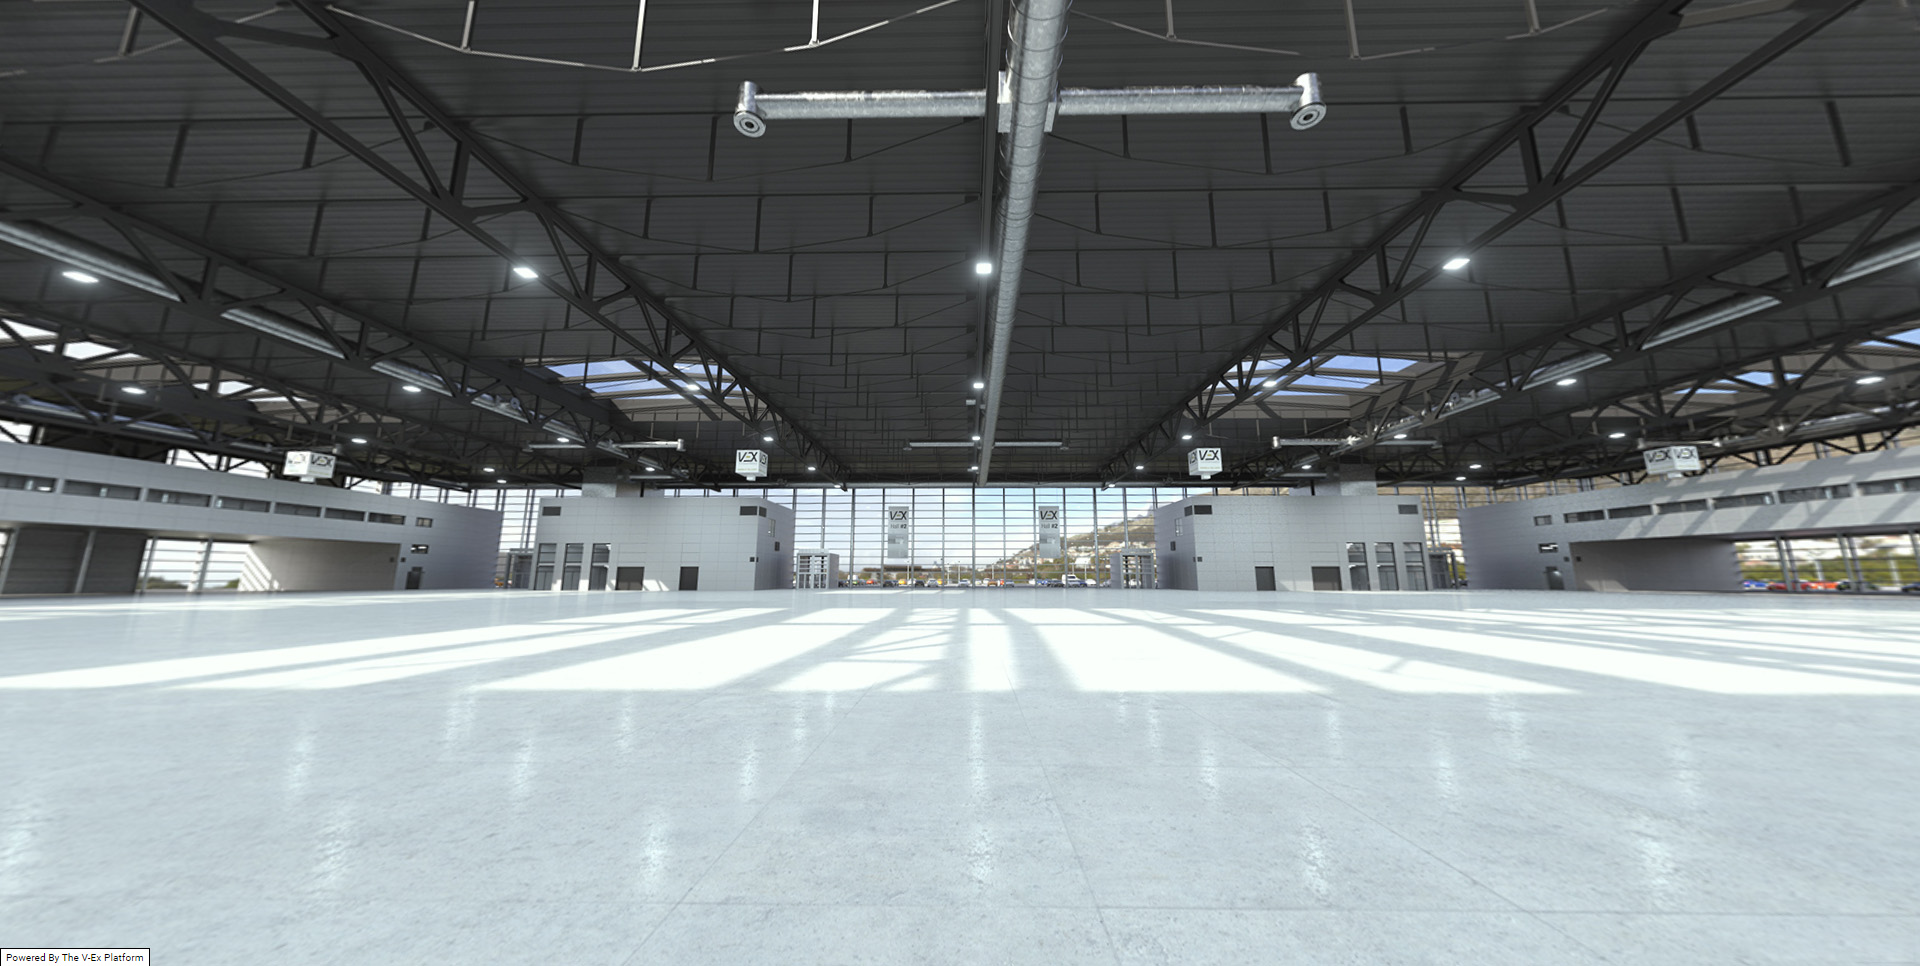 VirtualMachineXpo.online is currently in-build in Hall #3